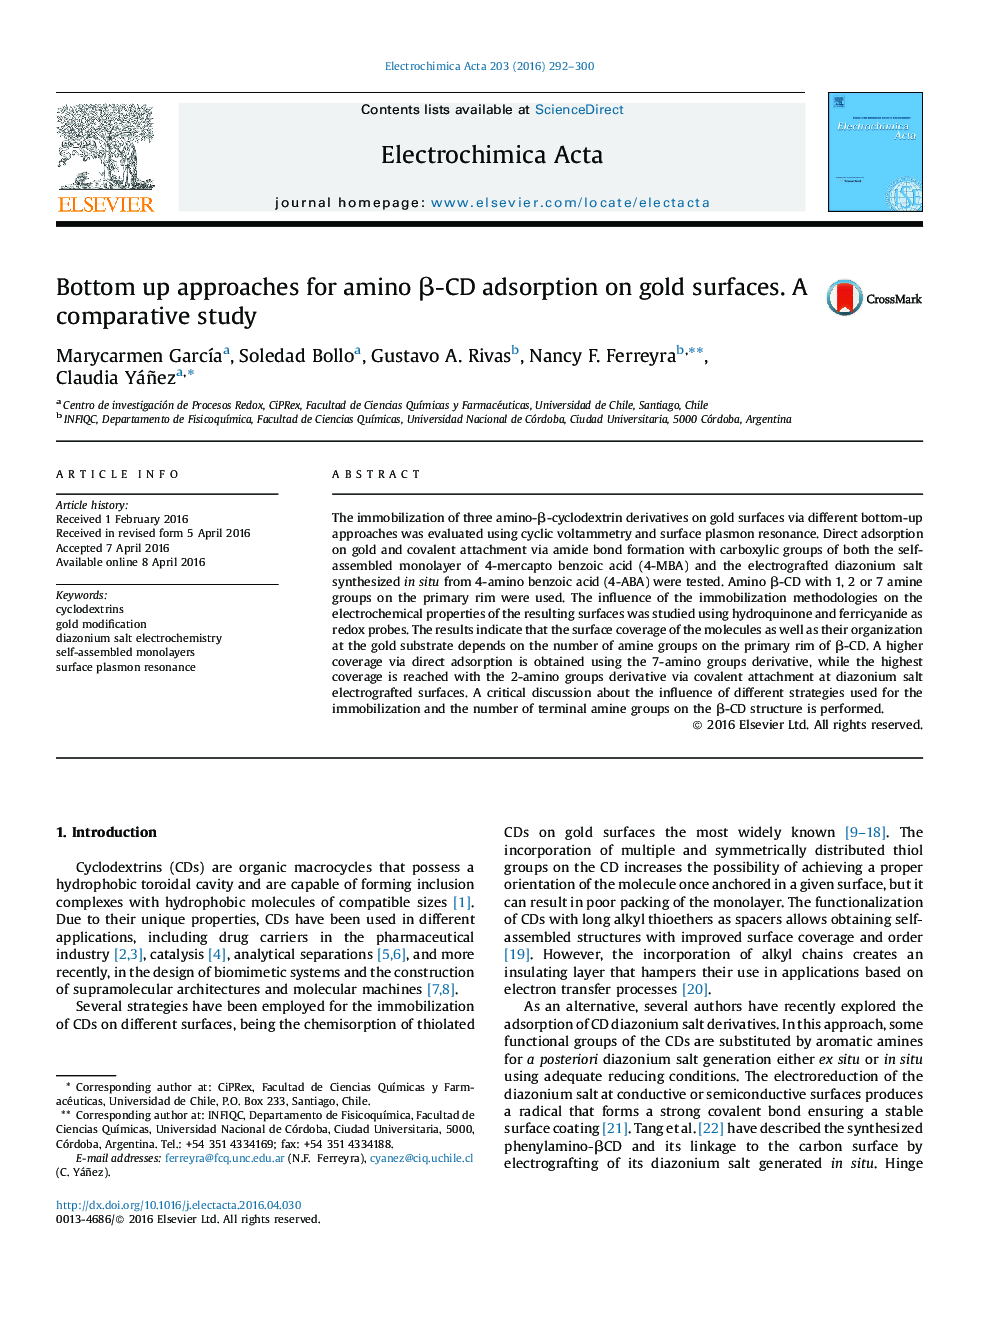 Bottom up approaches for amino β-CD adsorption on gold surfaces. A comparative study